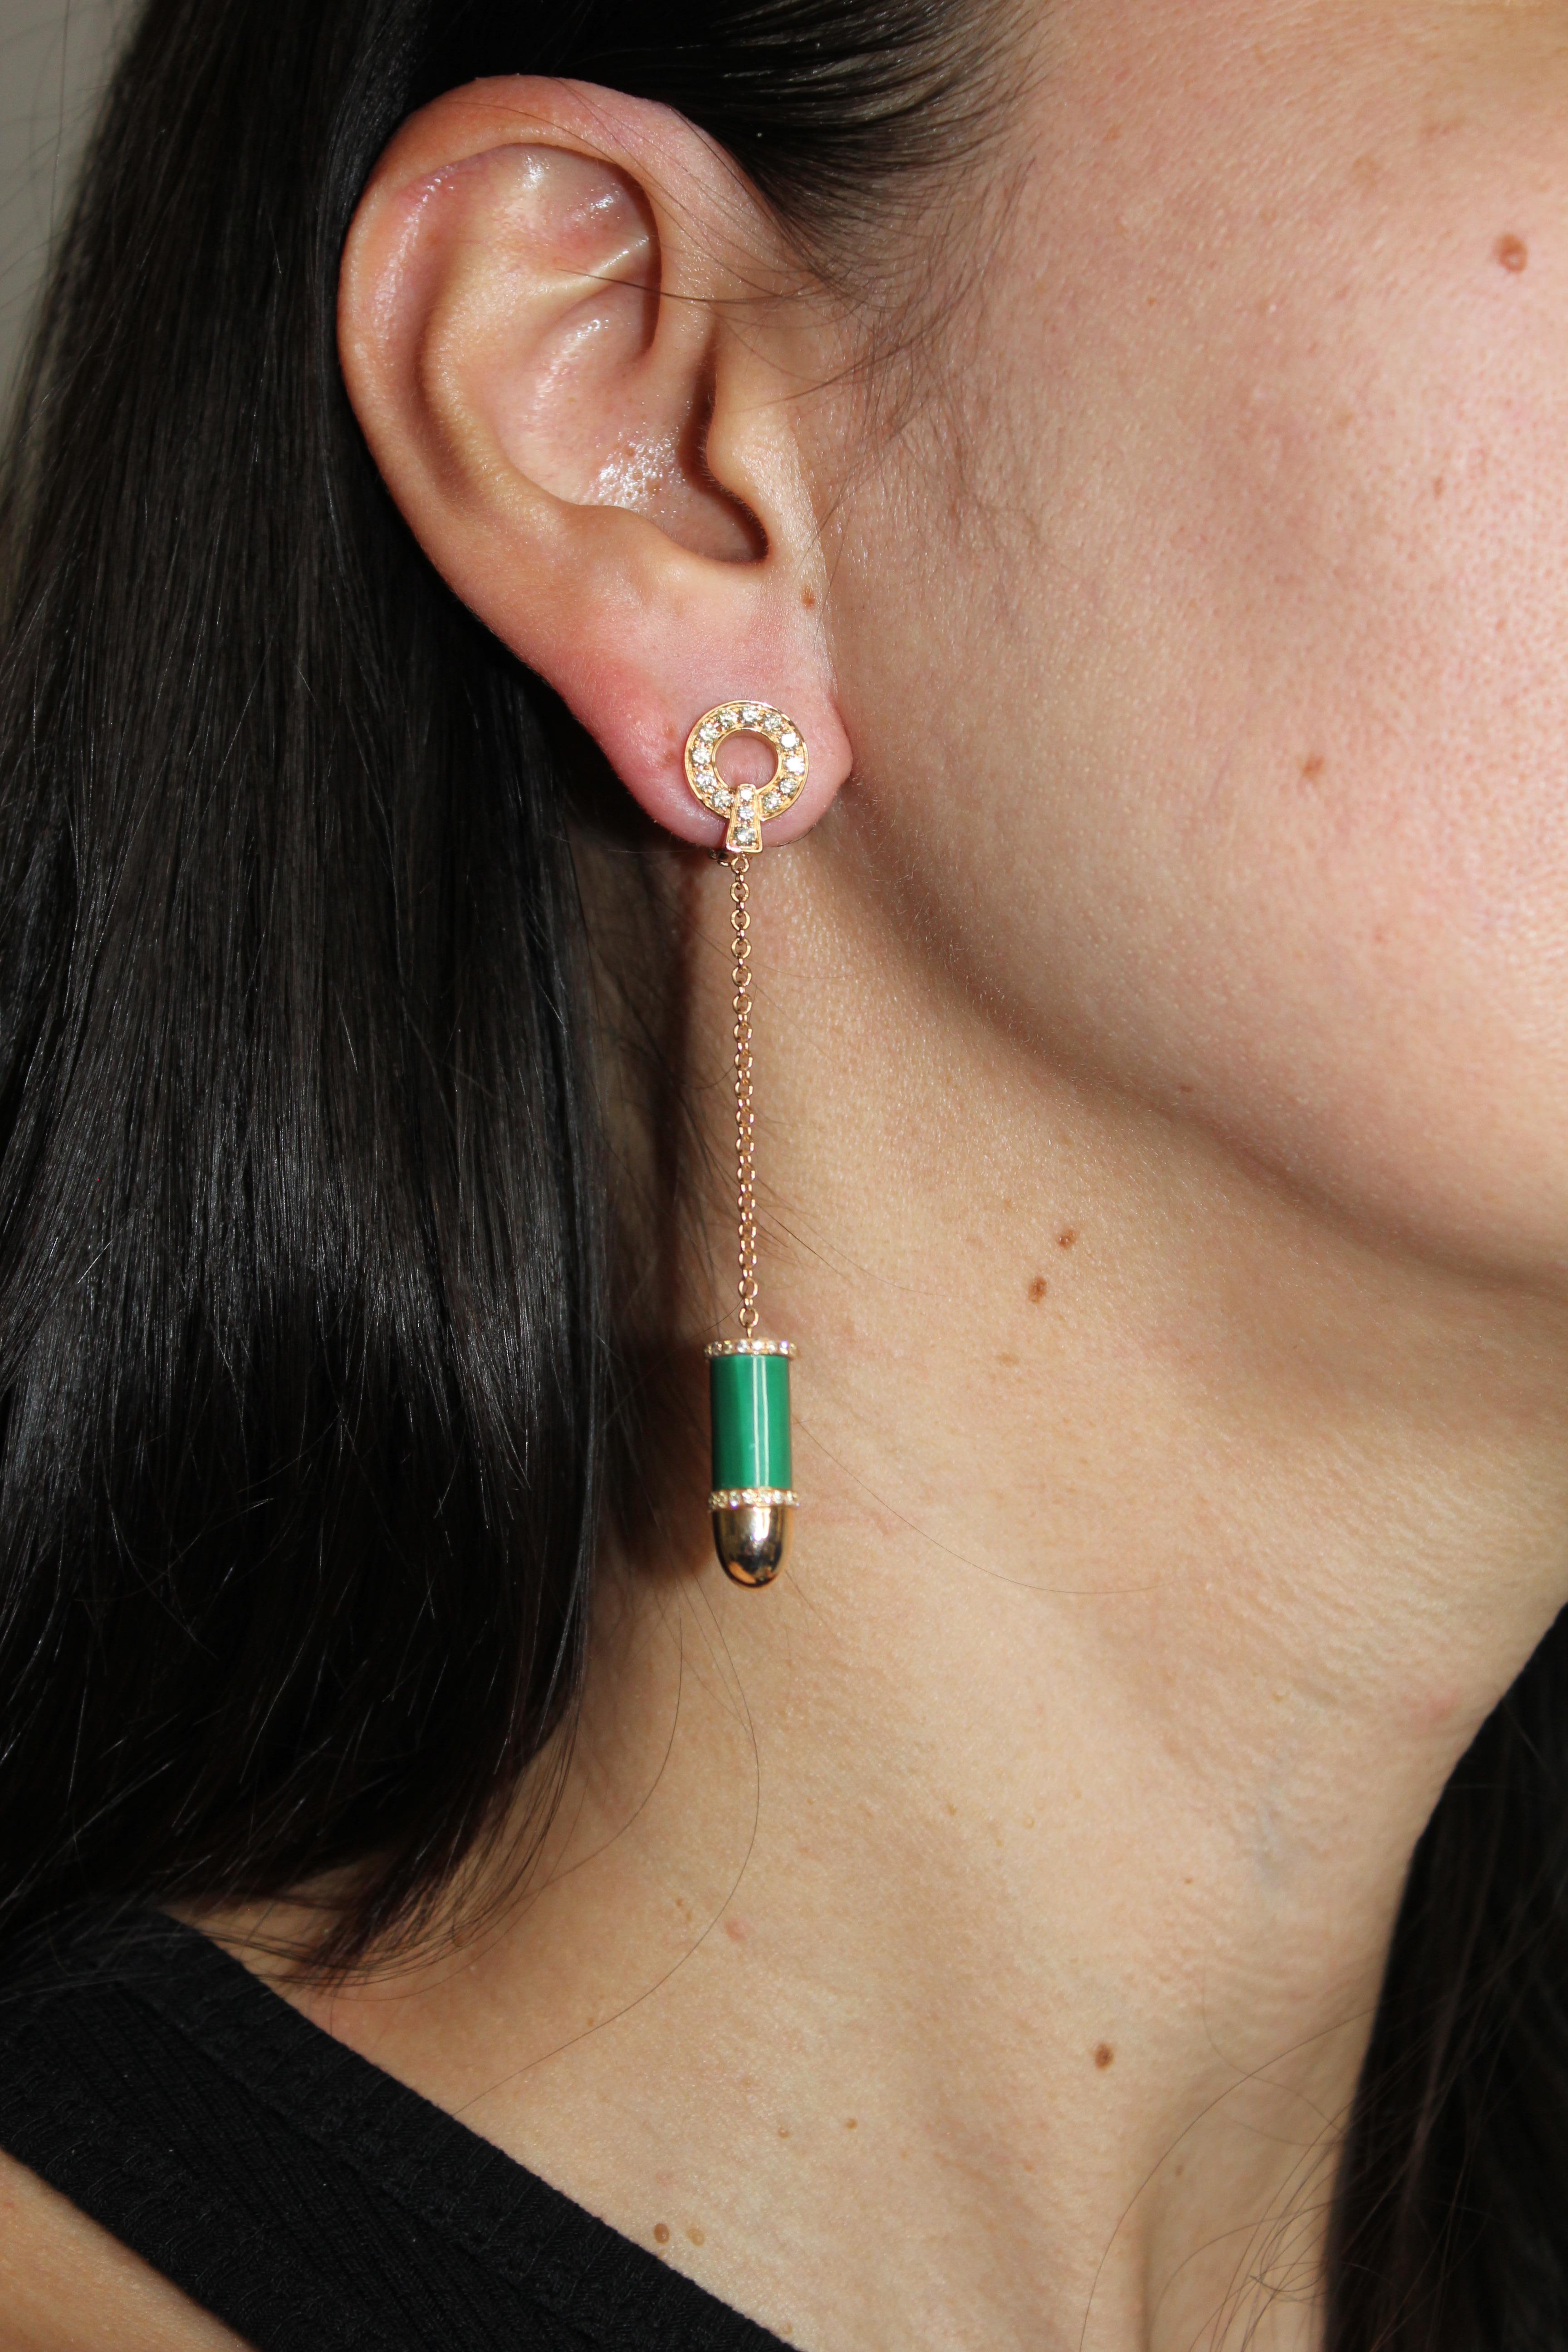 Diamond White Mother of Pearl  Gun Revolver 18 Karat Rose Gold Huggie Pave Drop Earrings Set
18K Rose Gold
White Mother of Pearl Bullet Gun Earrings
1.50 cts Pave Diamonds 

This is a combination of solid rose + white gold + white MOP handle design.